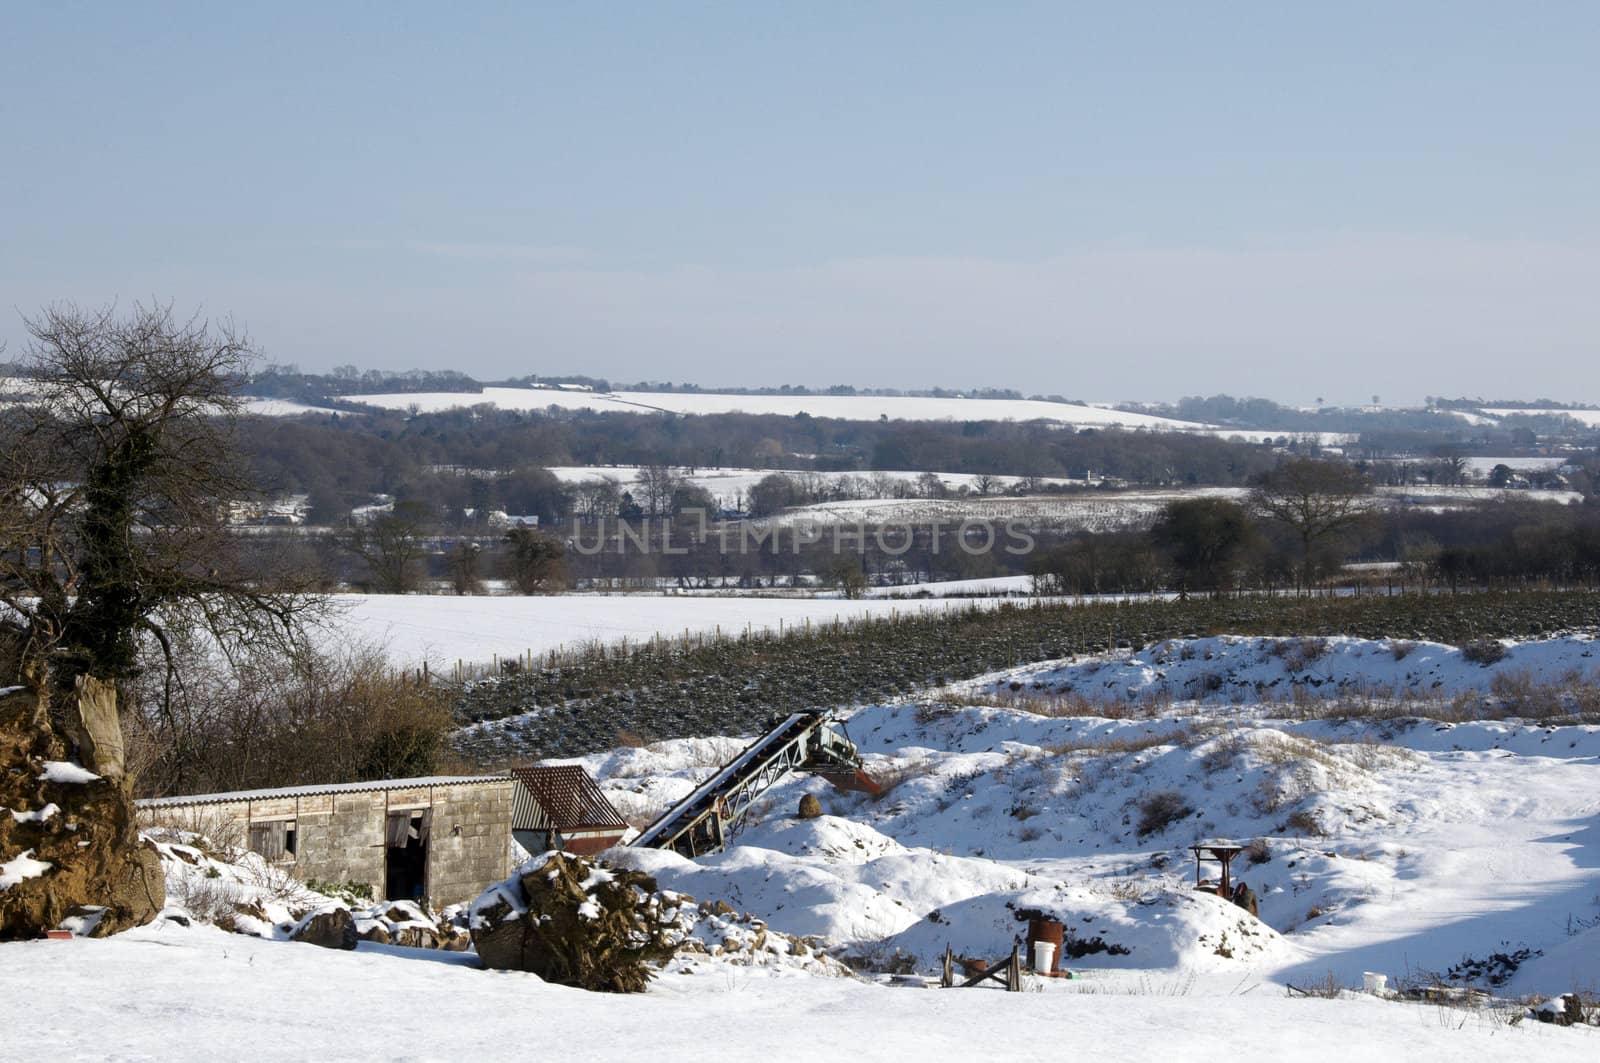 A view of the kent countryside in winter